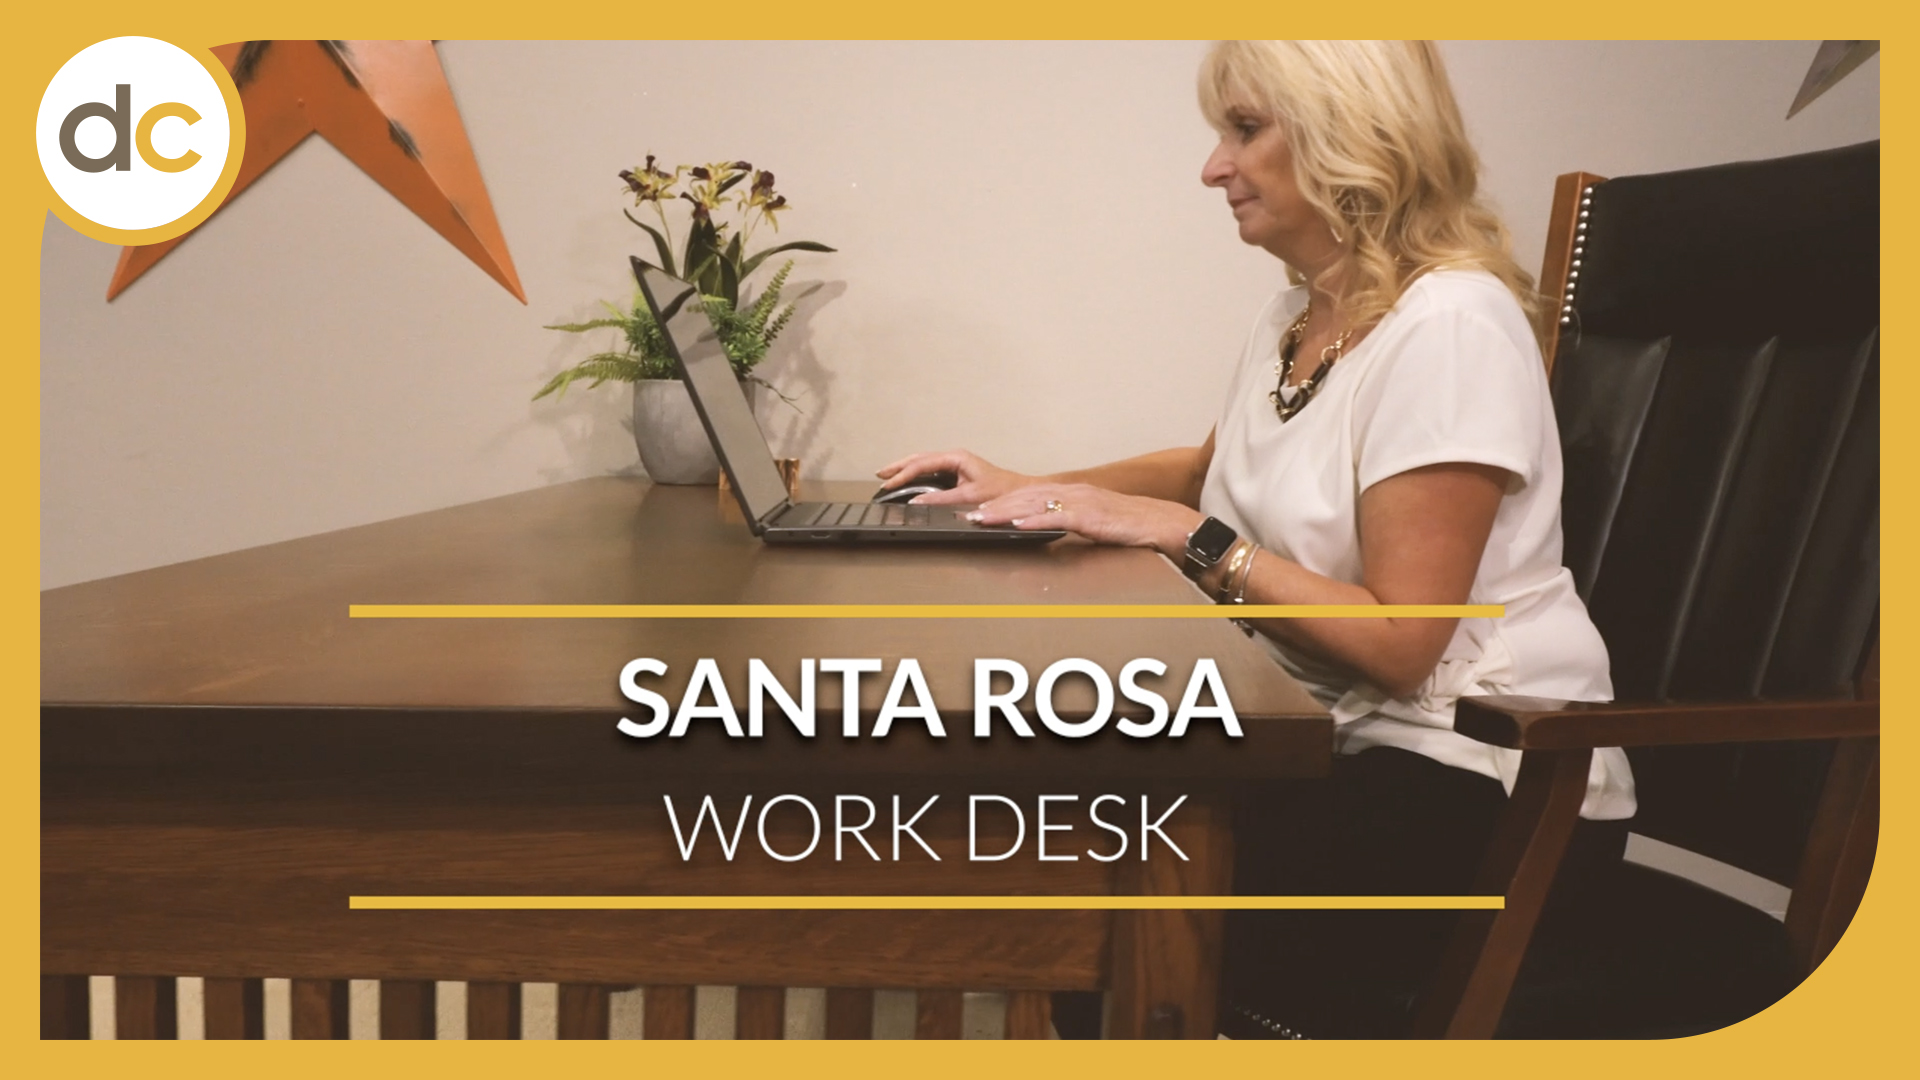 The title Santa Rosa Work Desk is displayed over a woman sitting at a mission style desk